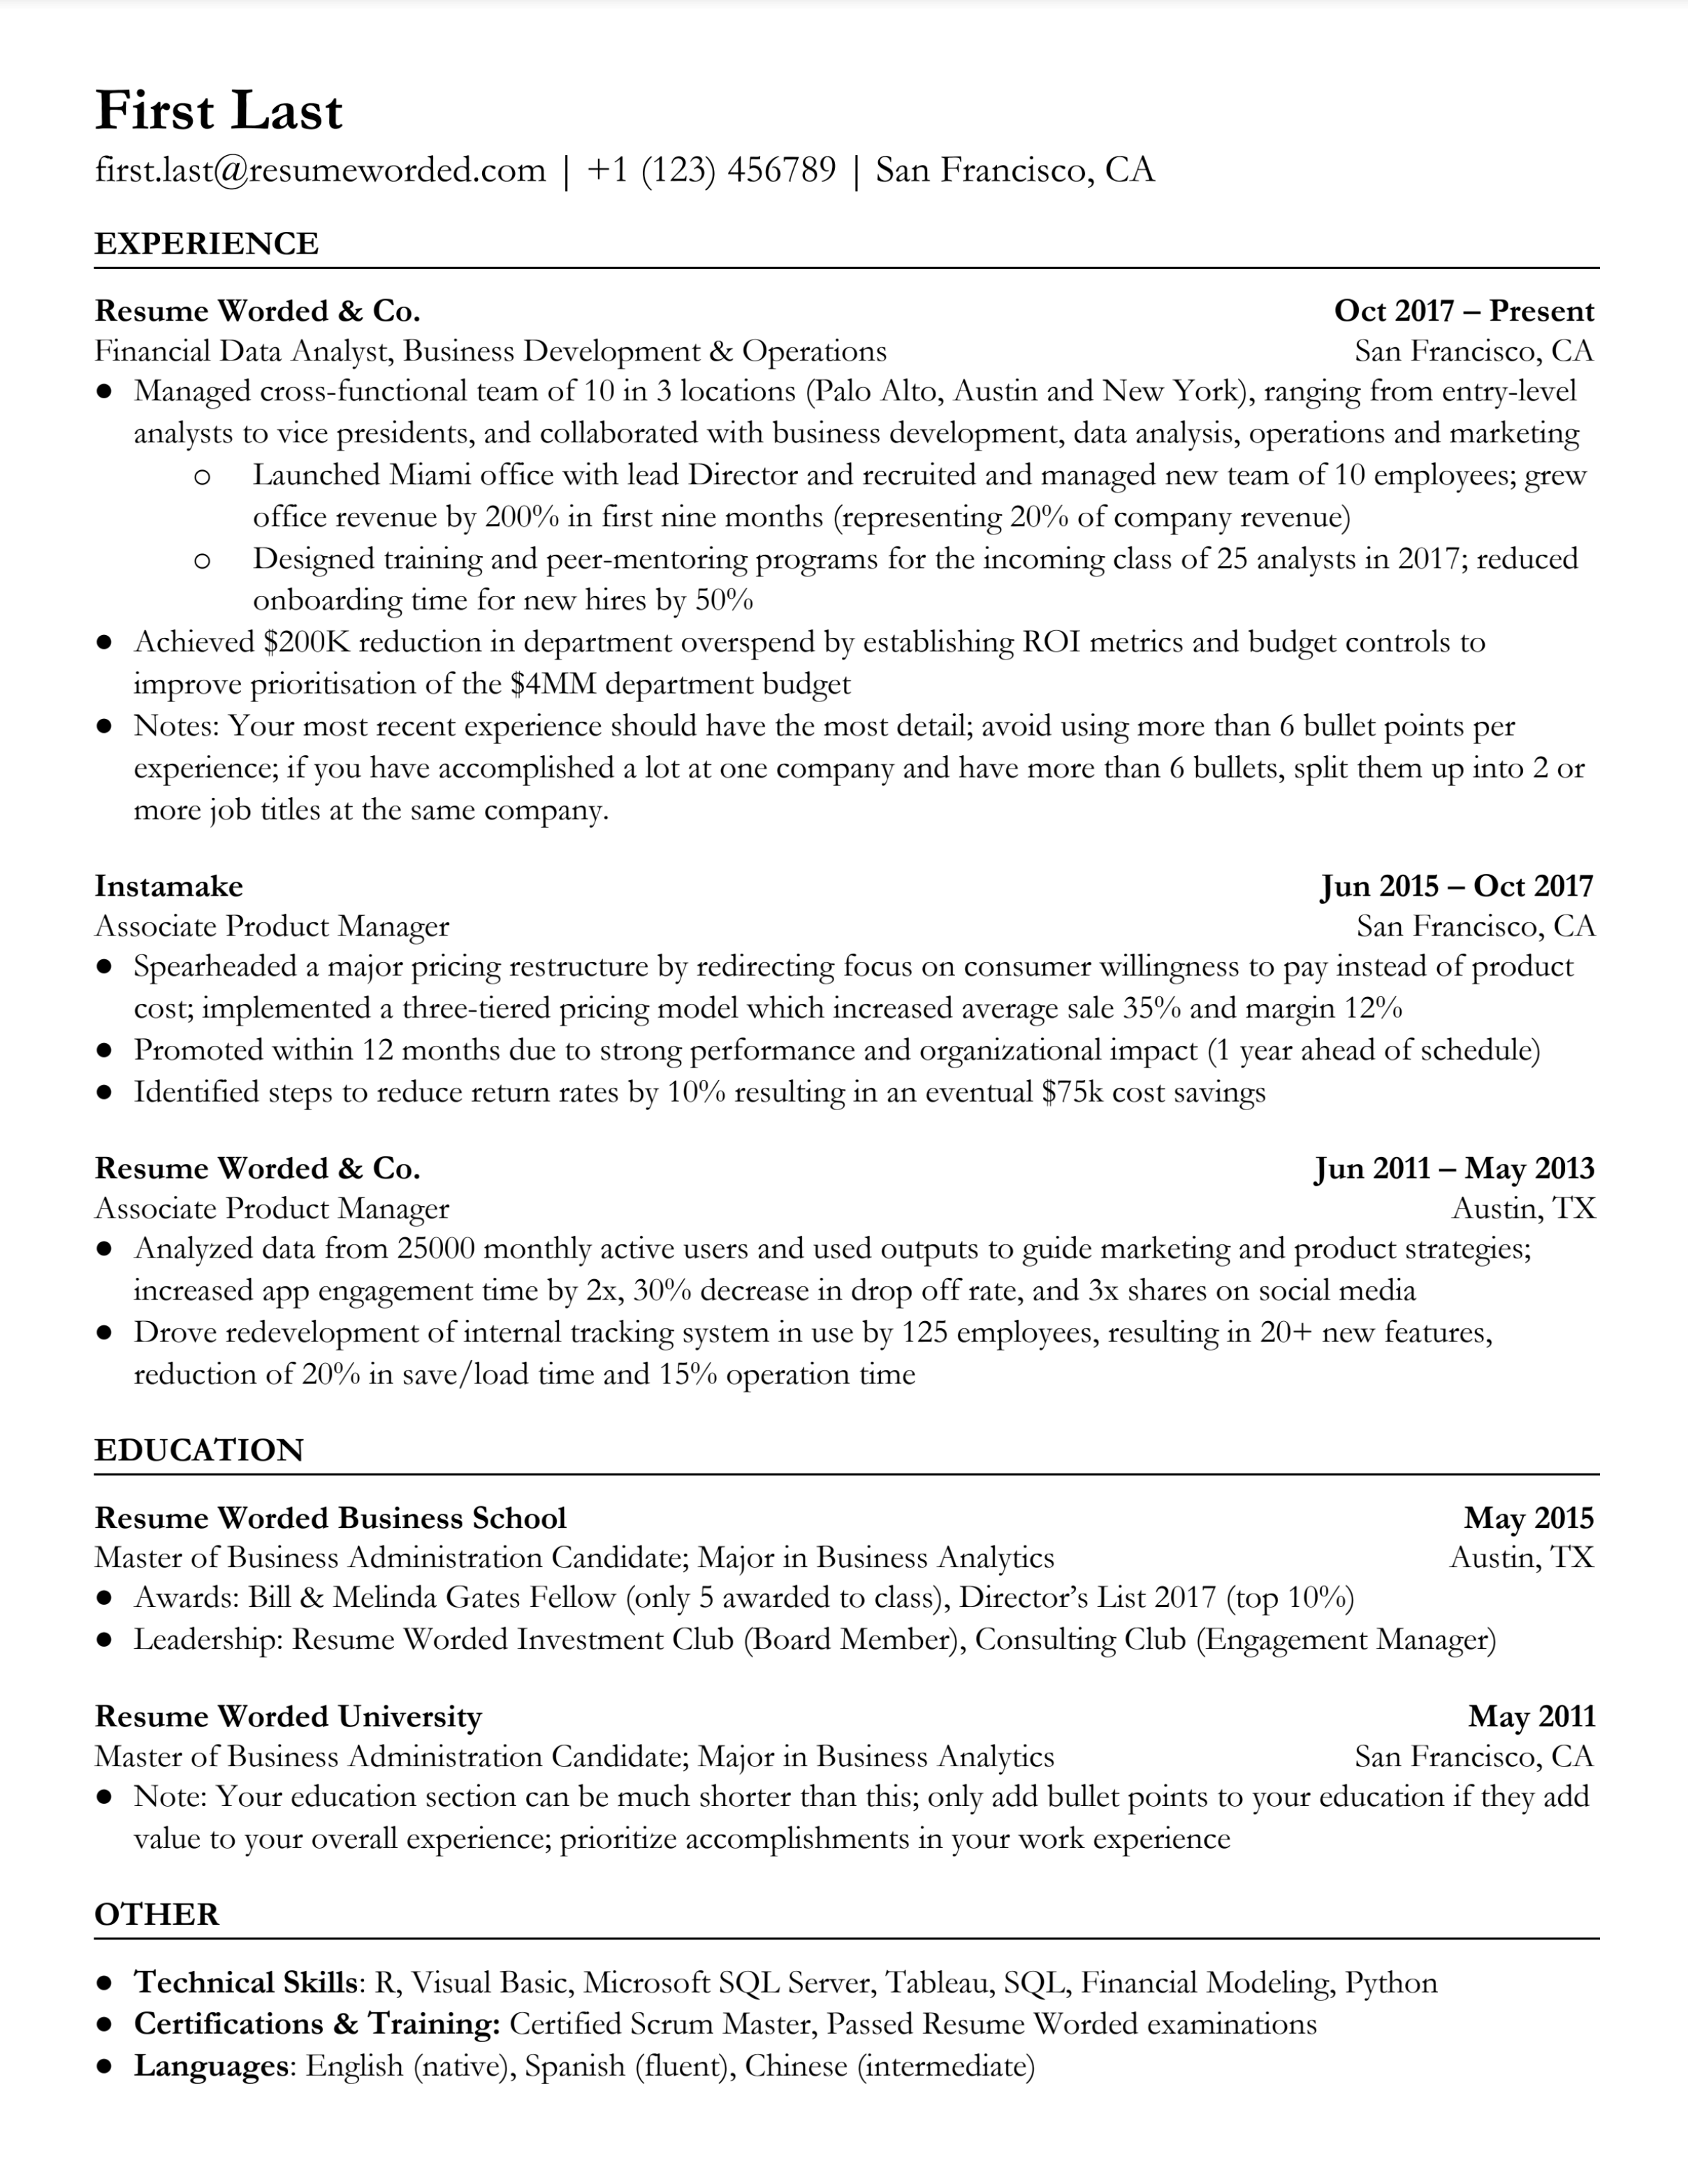 A well-crafted CV for a Financial Data Analyst role.